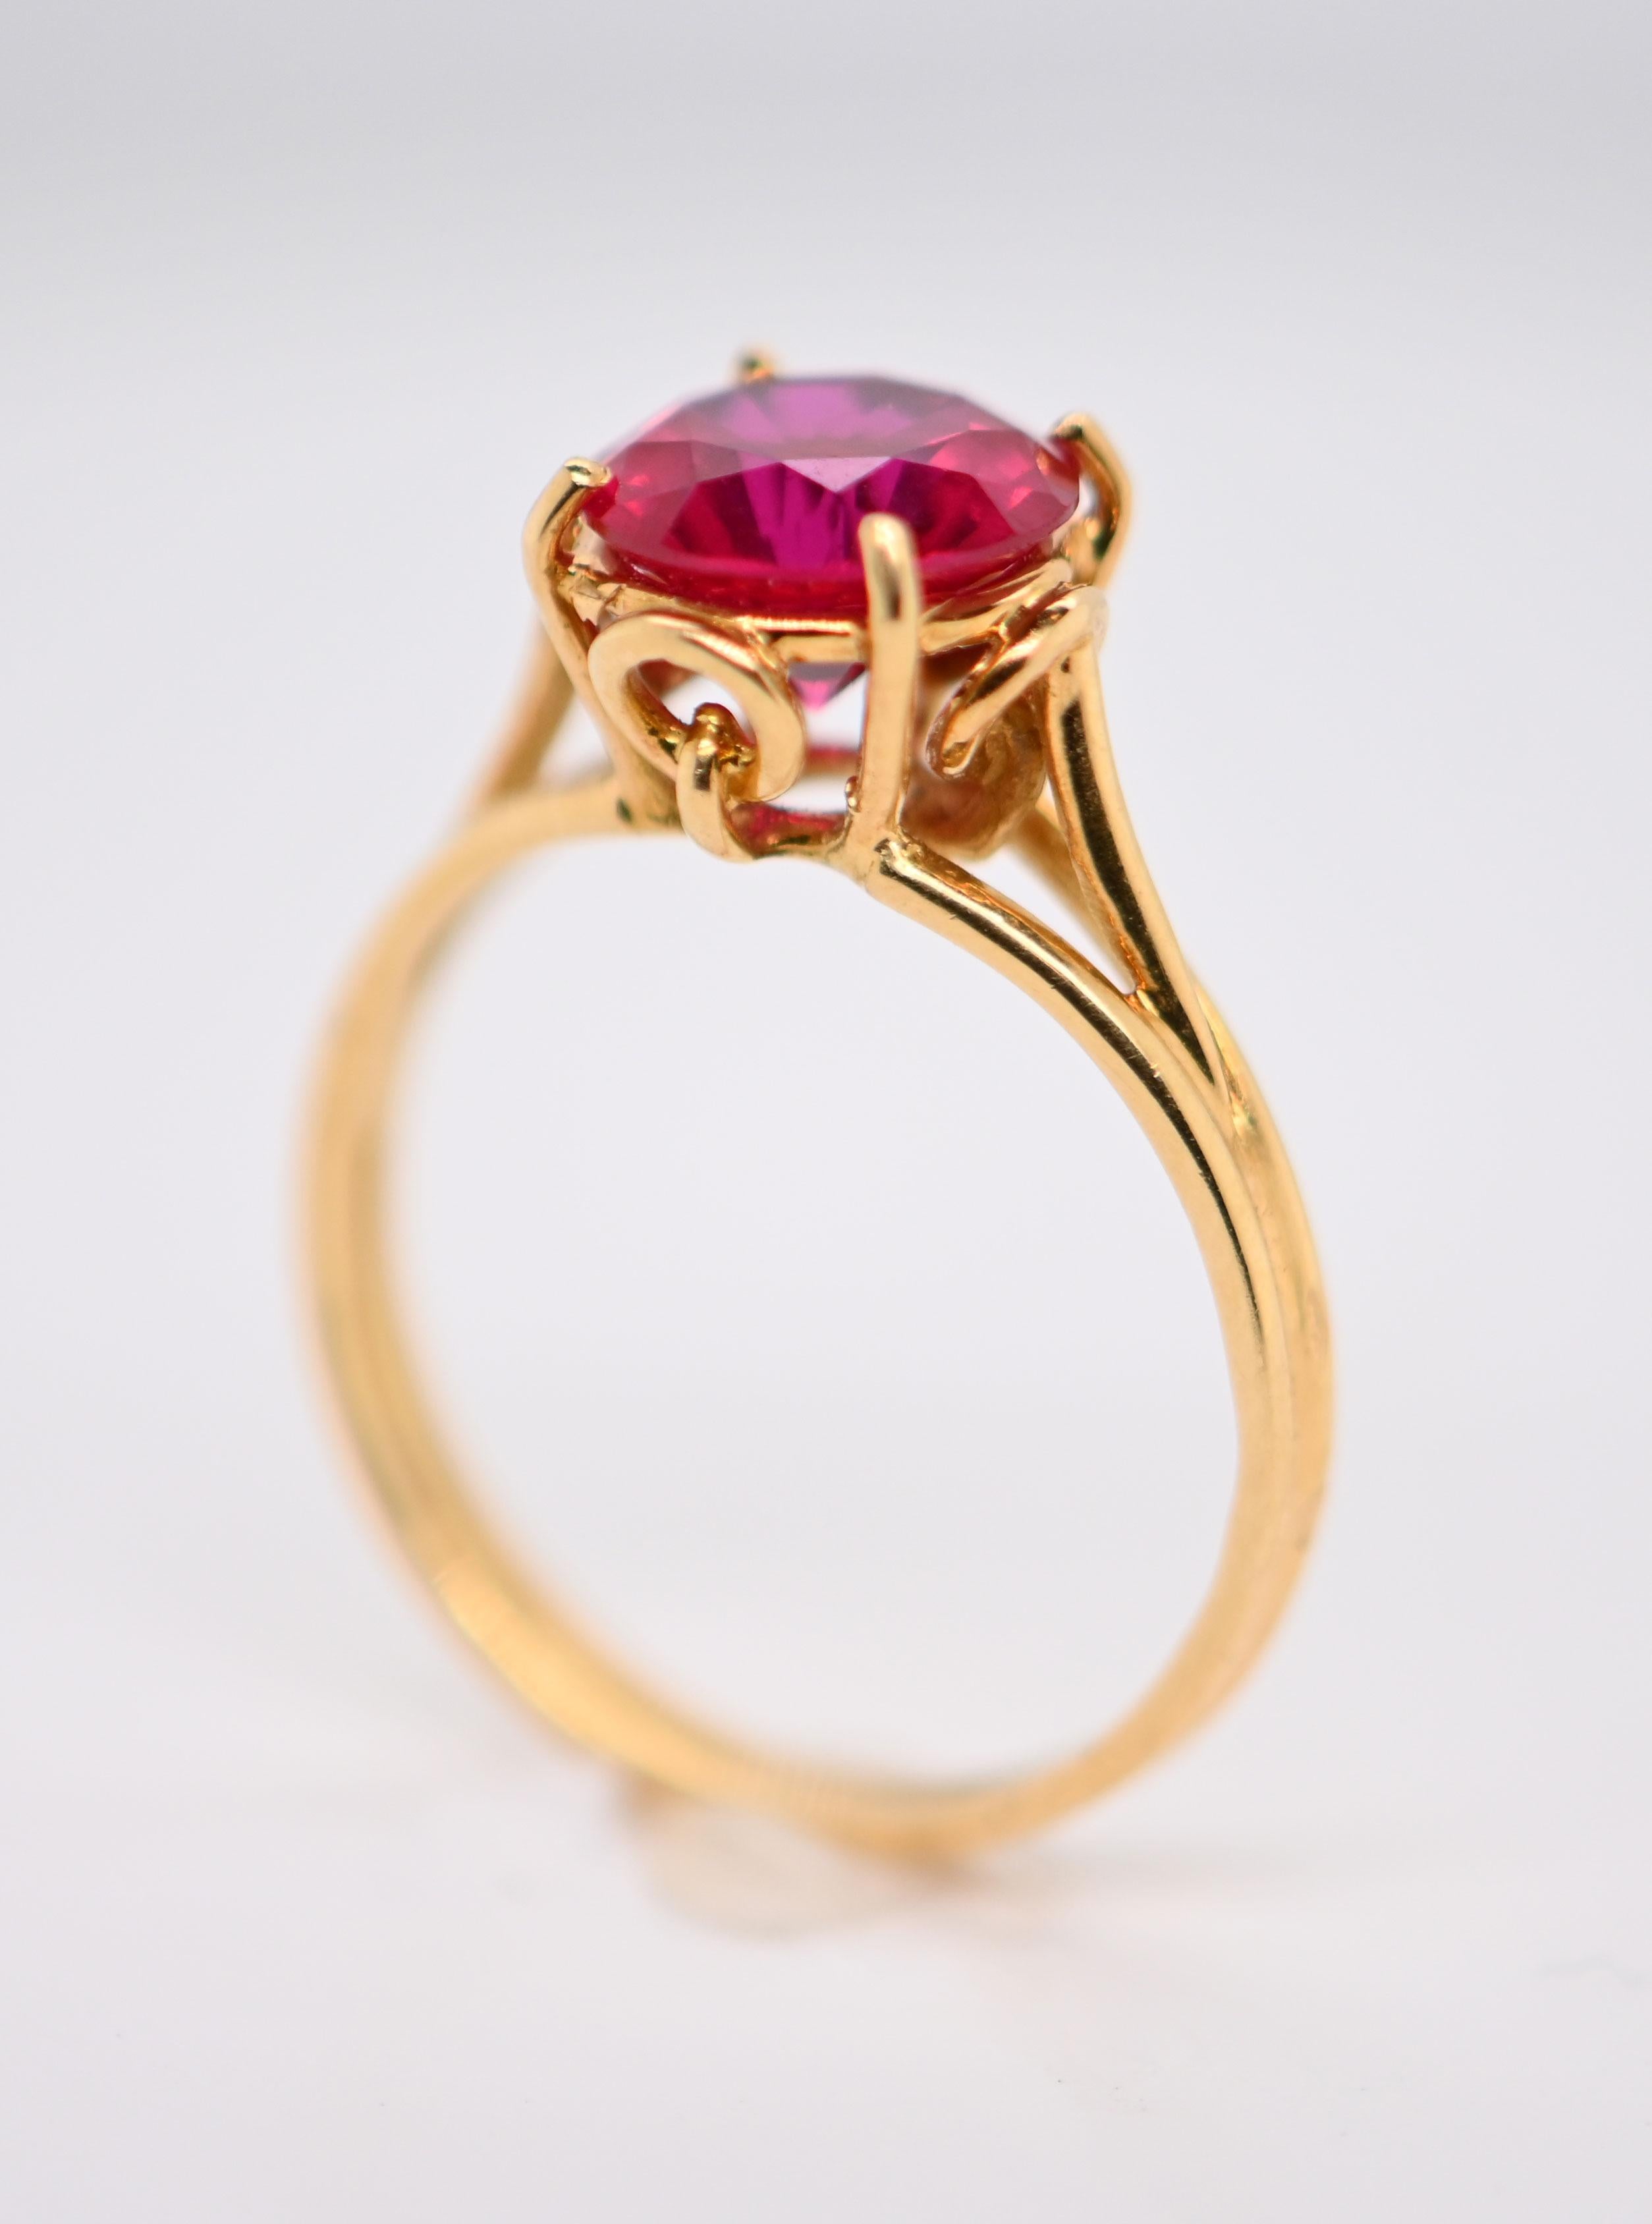 Artisan Gold Ring with Rubellite Solitaire For Sale